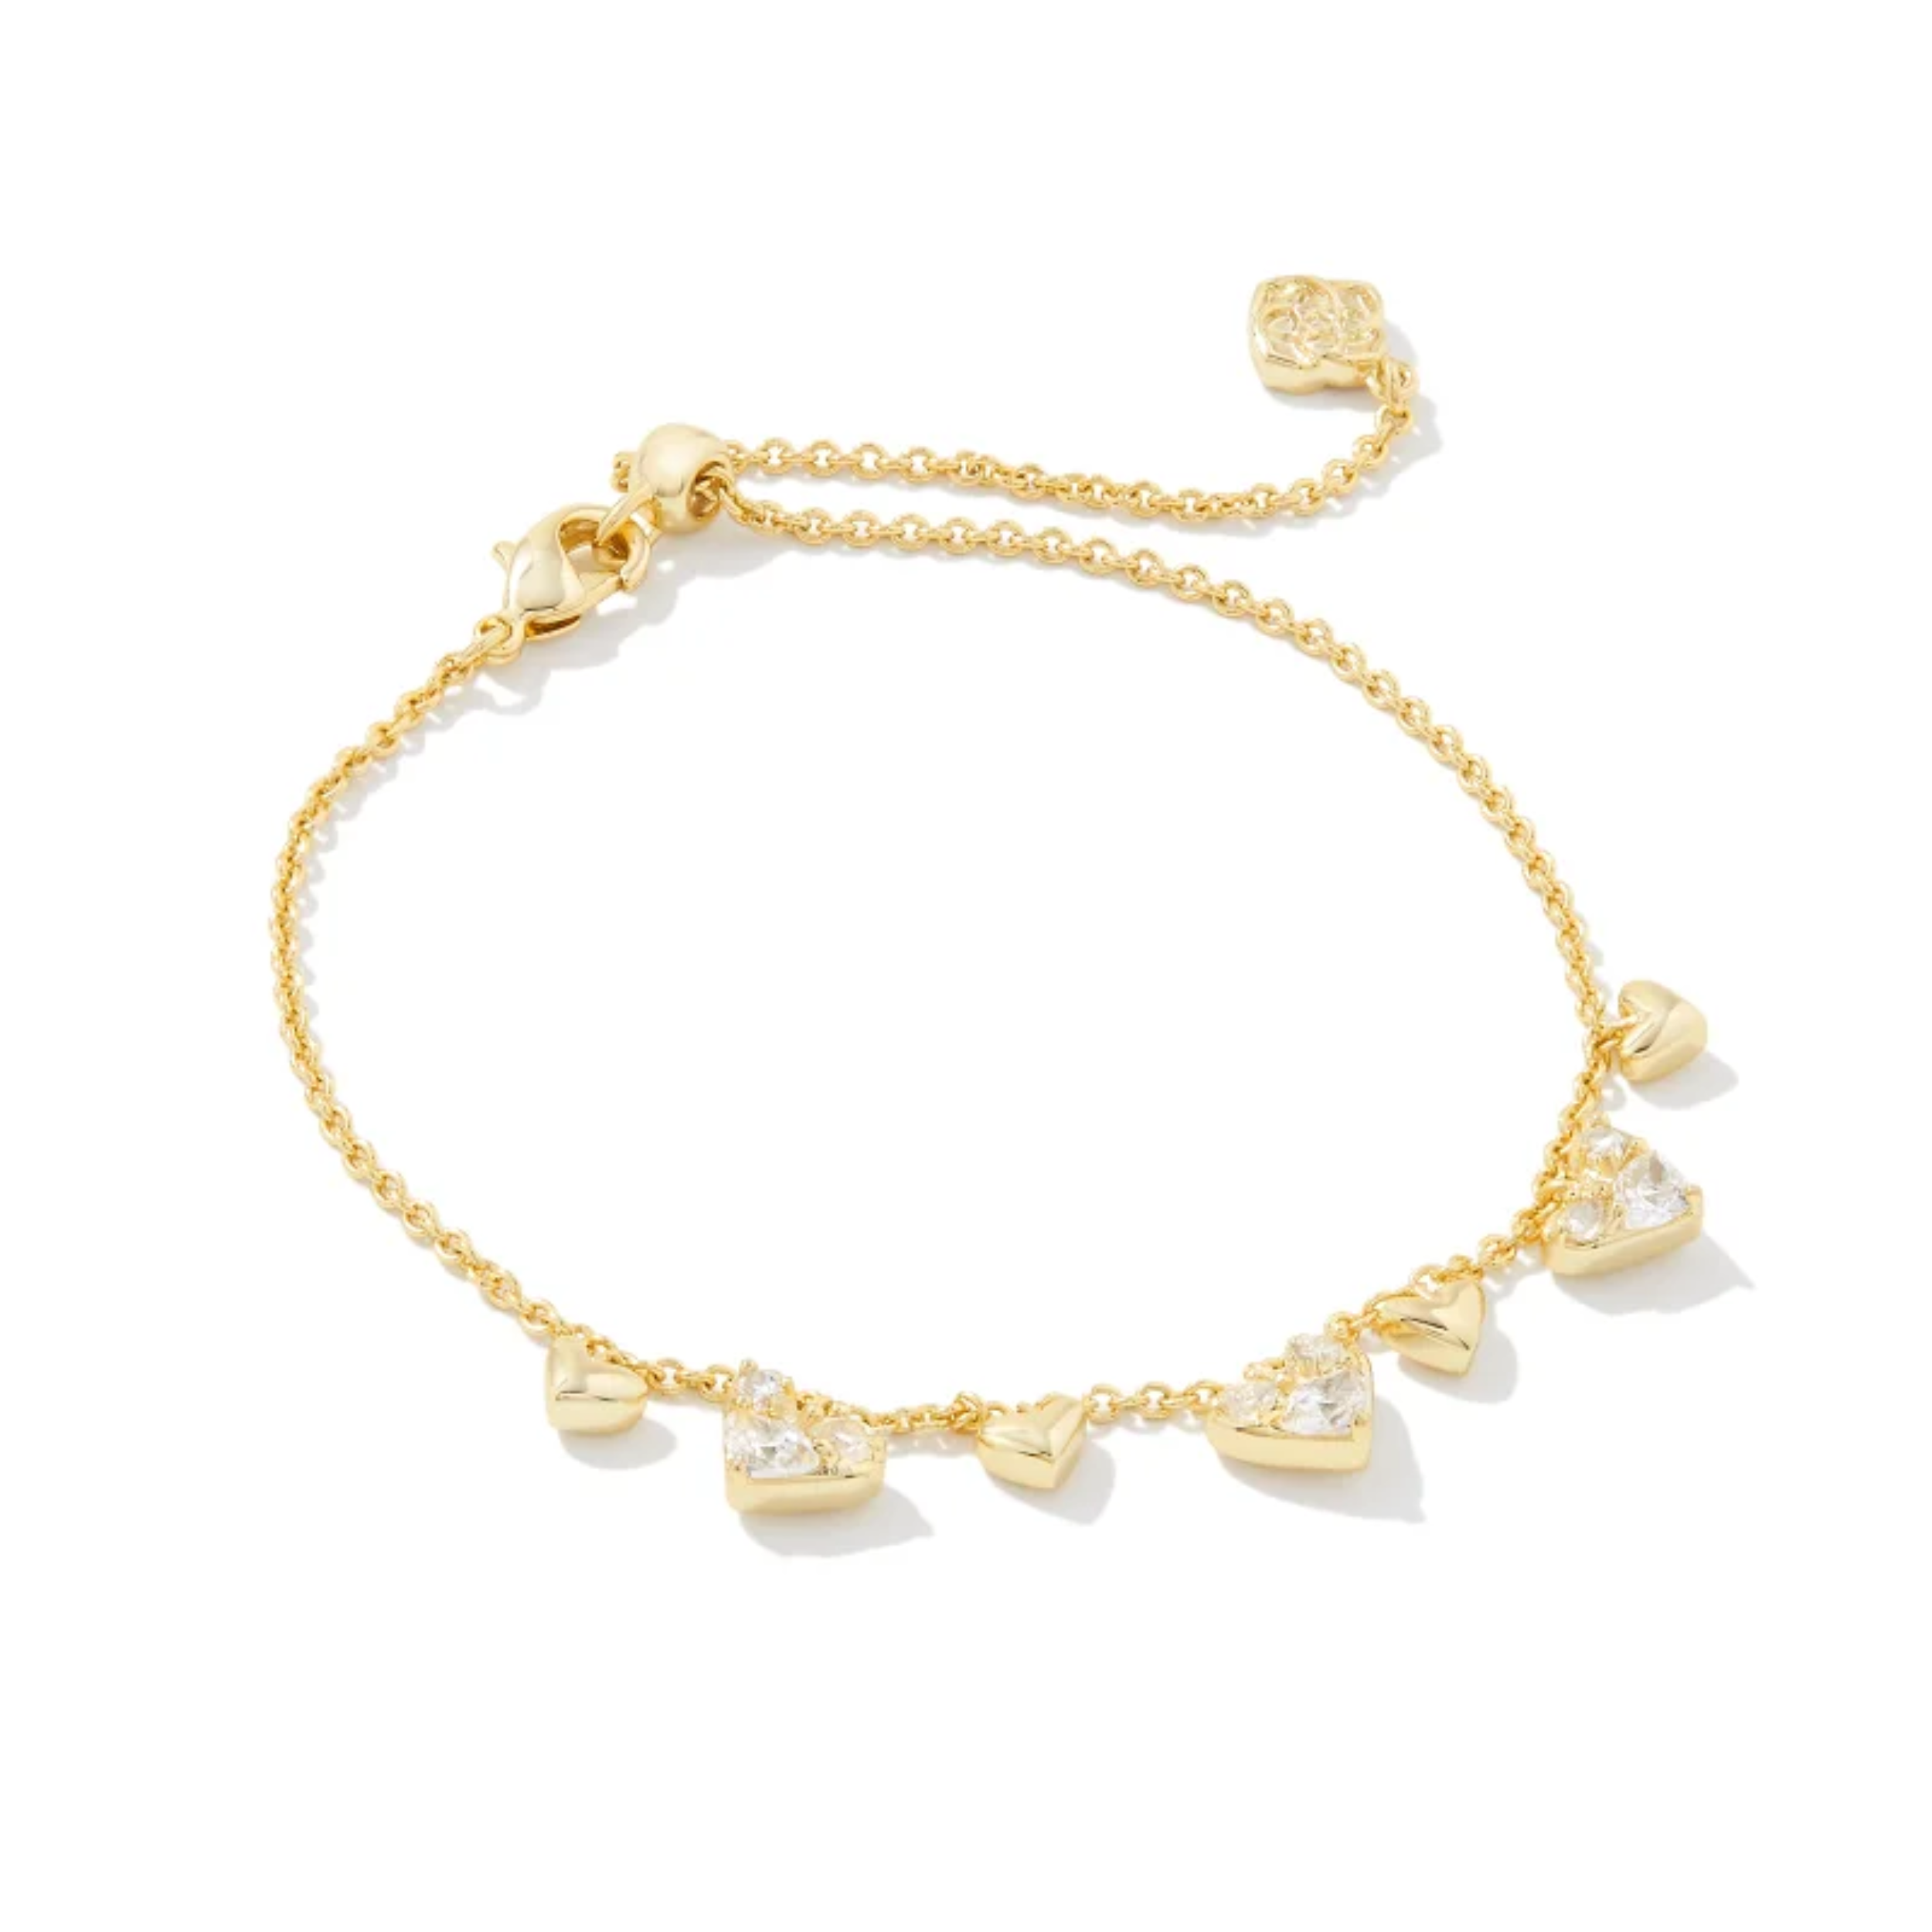 This Haven Heart Gold Crystal Chain Bracelet in white Crystal is pictured on a white background.